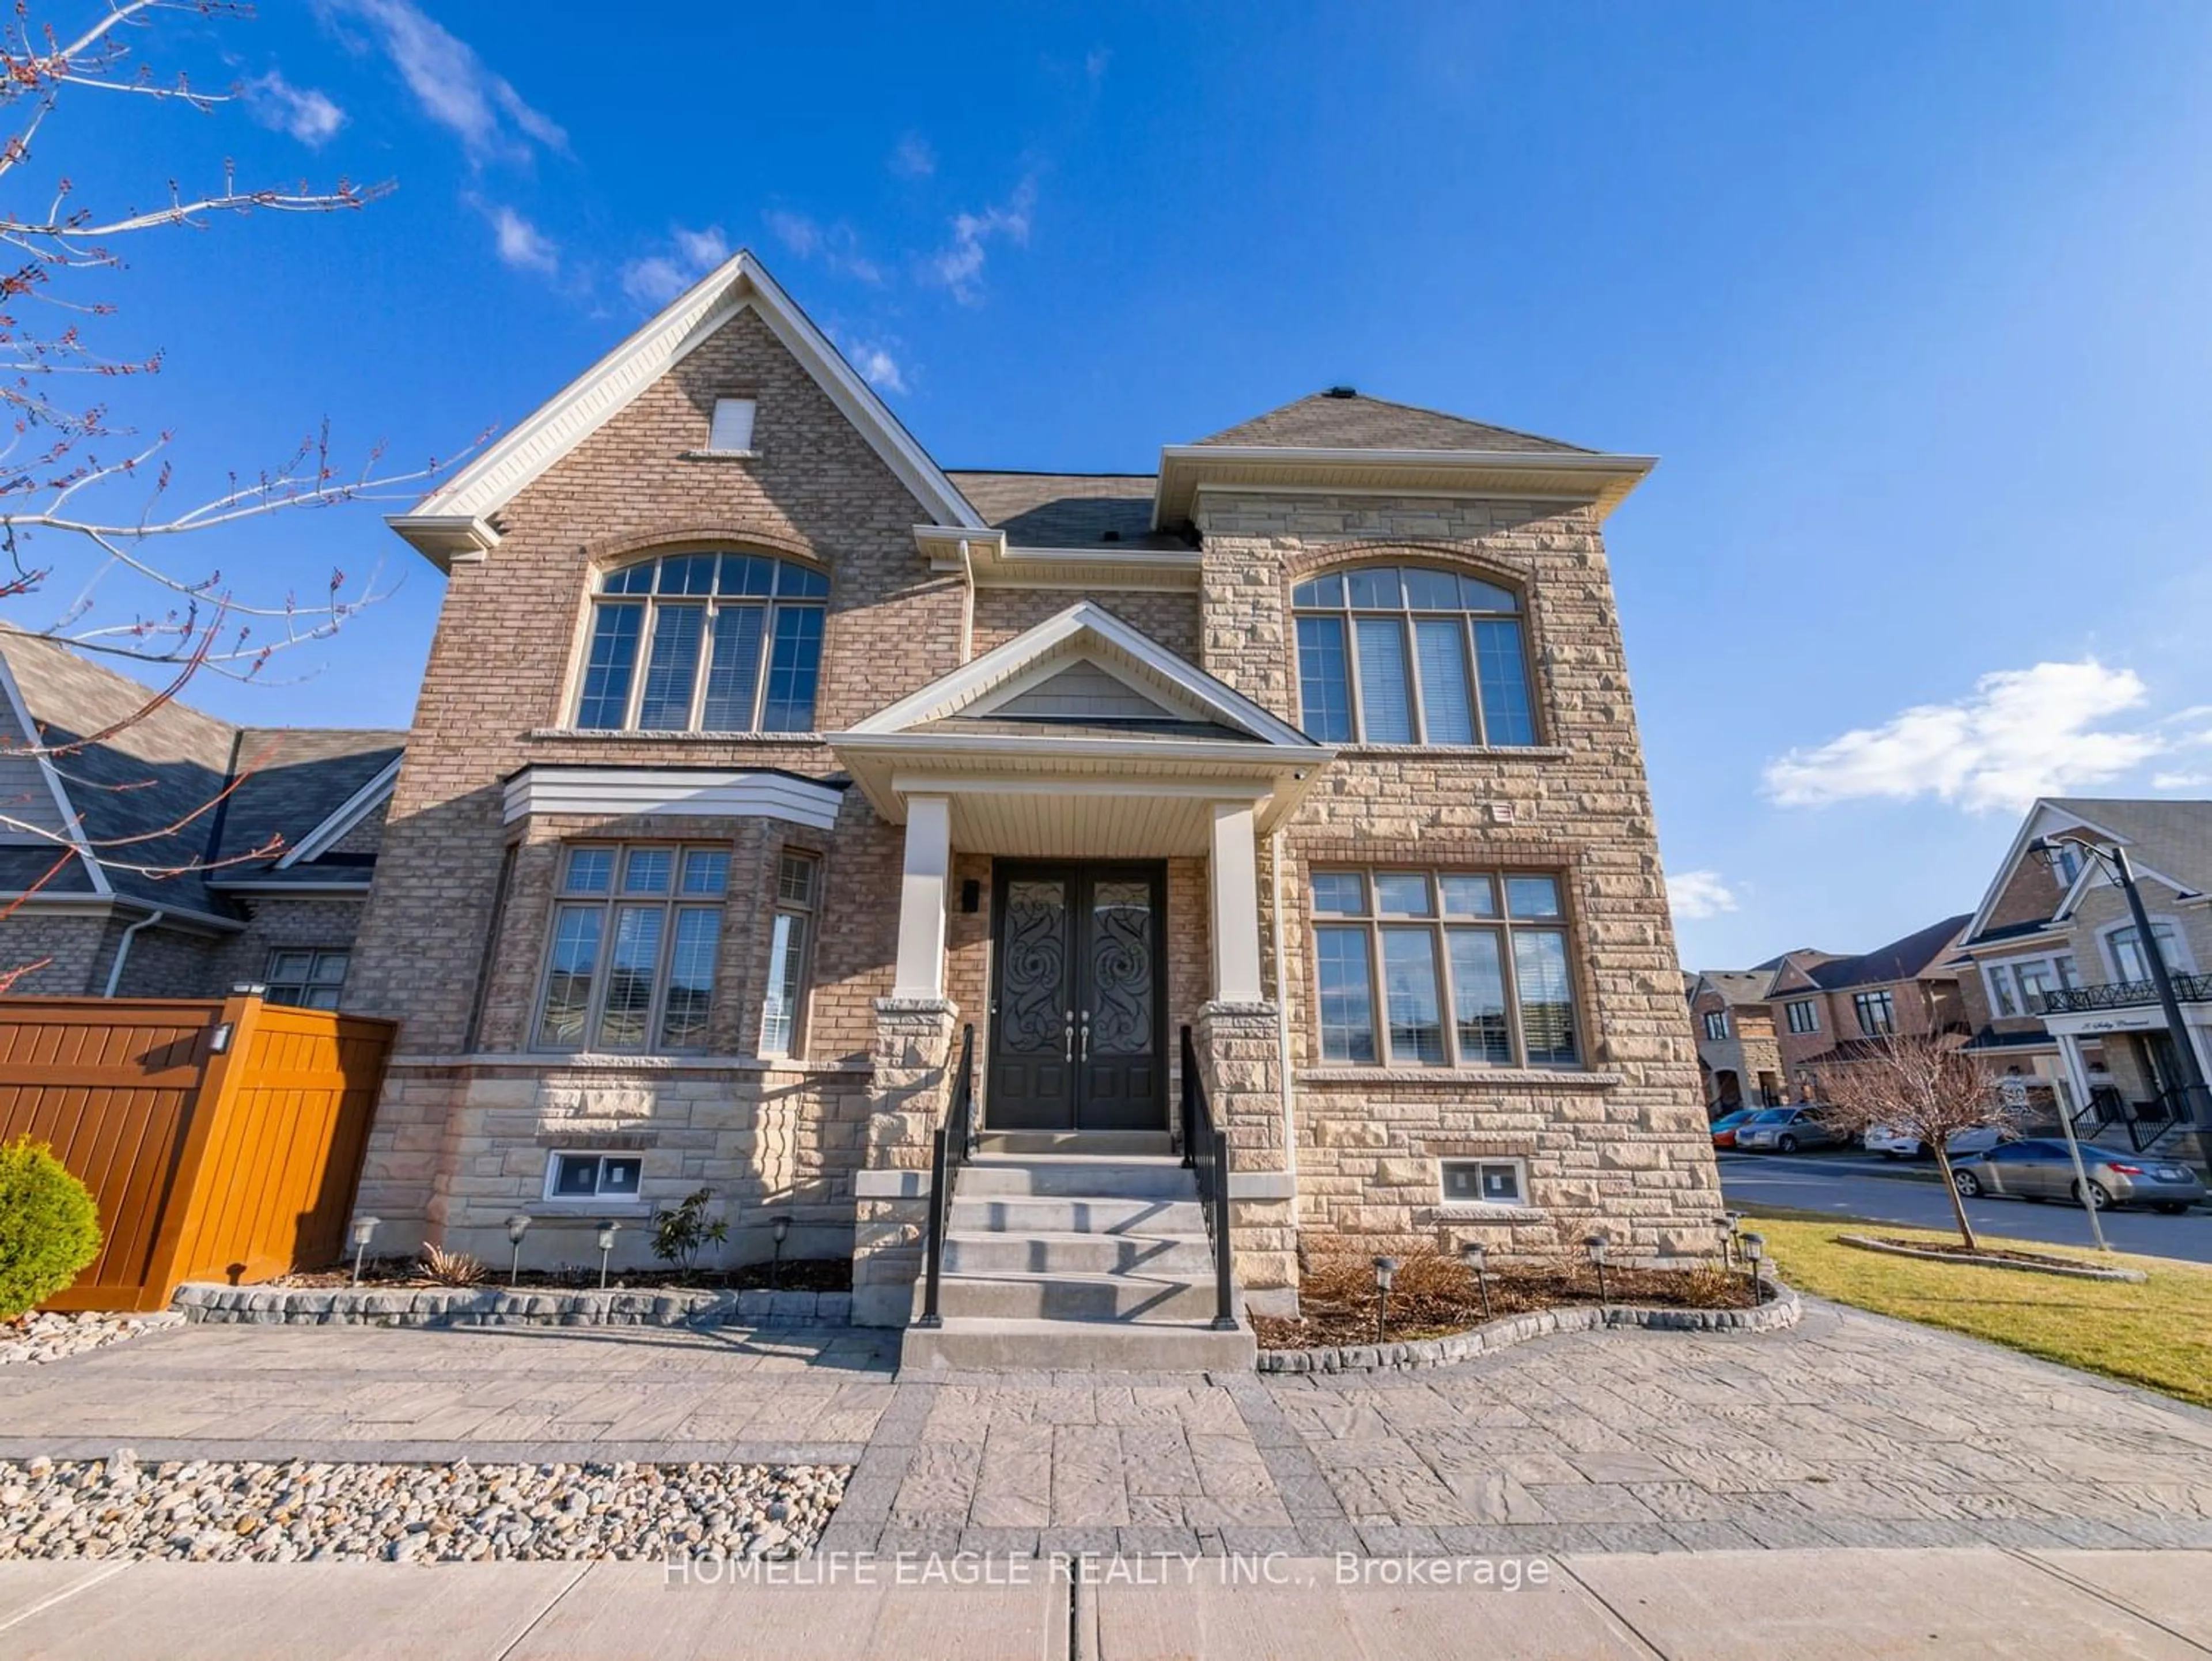 Home with brick exterior material for 1 Selby Cres, Bradford West Gwillimbury Ontario L3Z 0V4